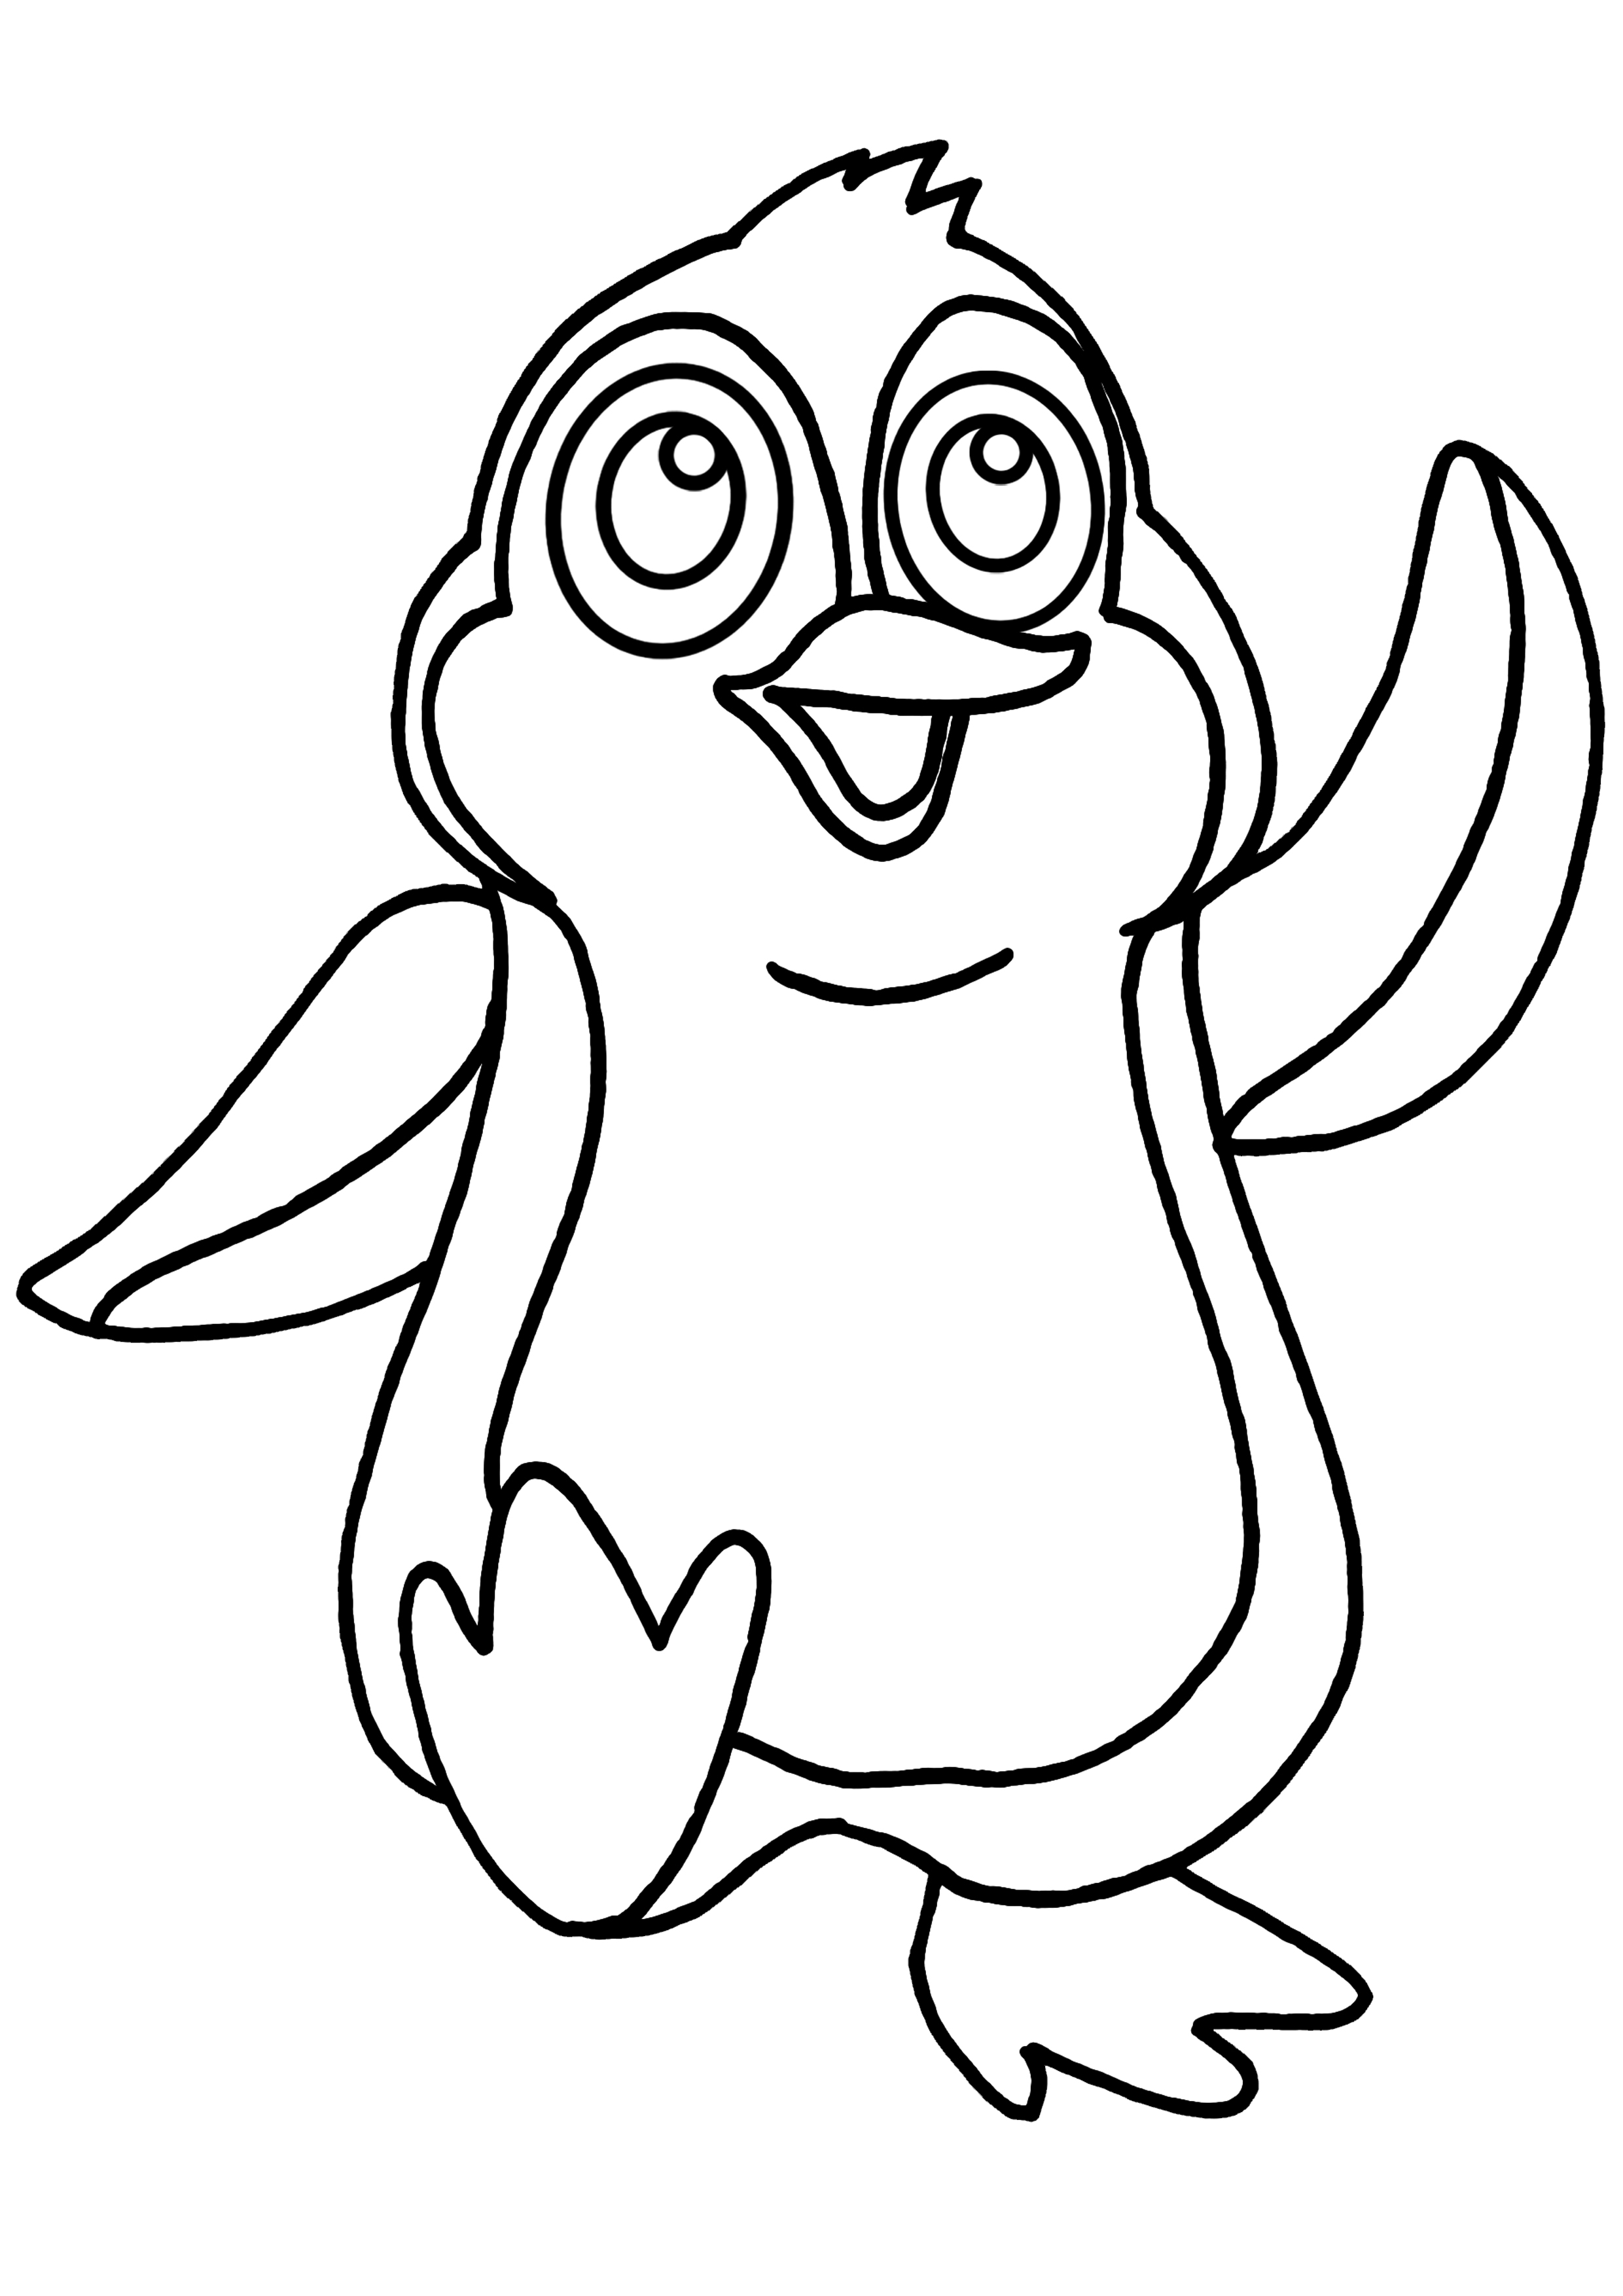 Coloring page Penguin 16904 (Animals) Printable Coloring Pages